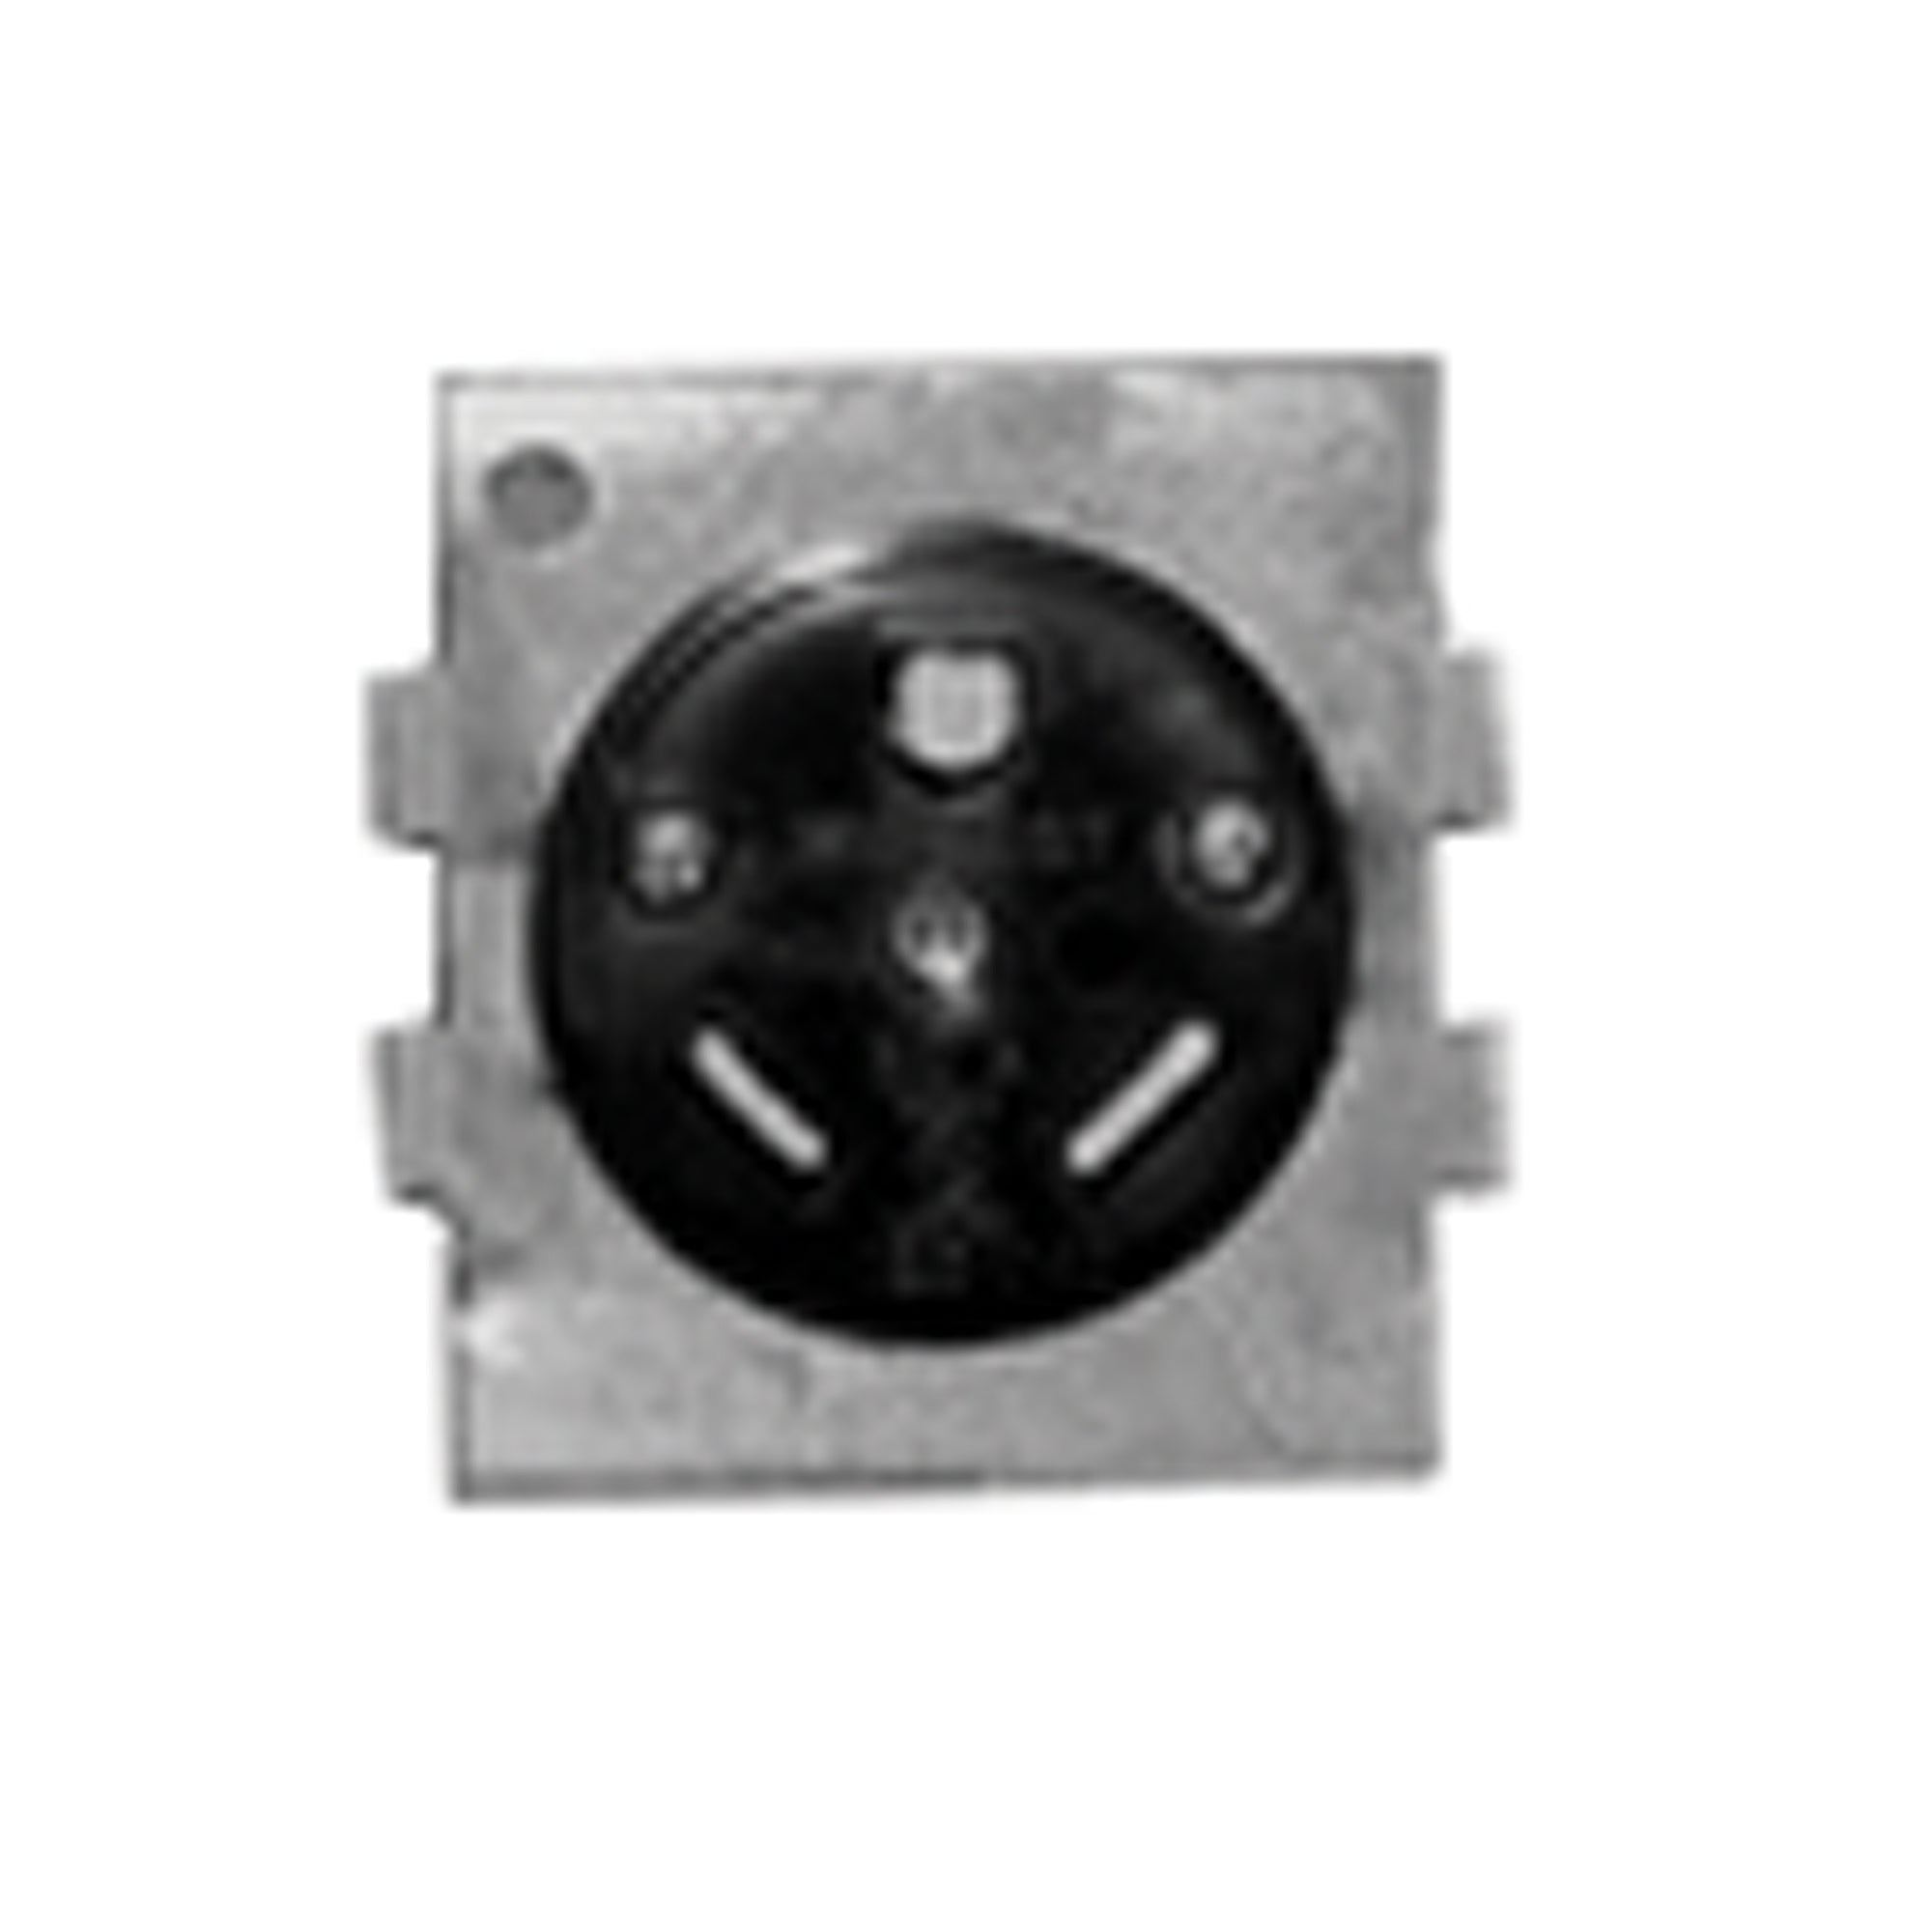 Midwest Electric BR32U Receptacles - 2 Pole 3 Wire